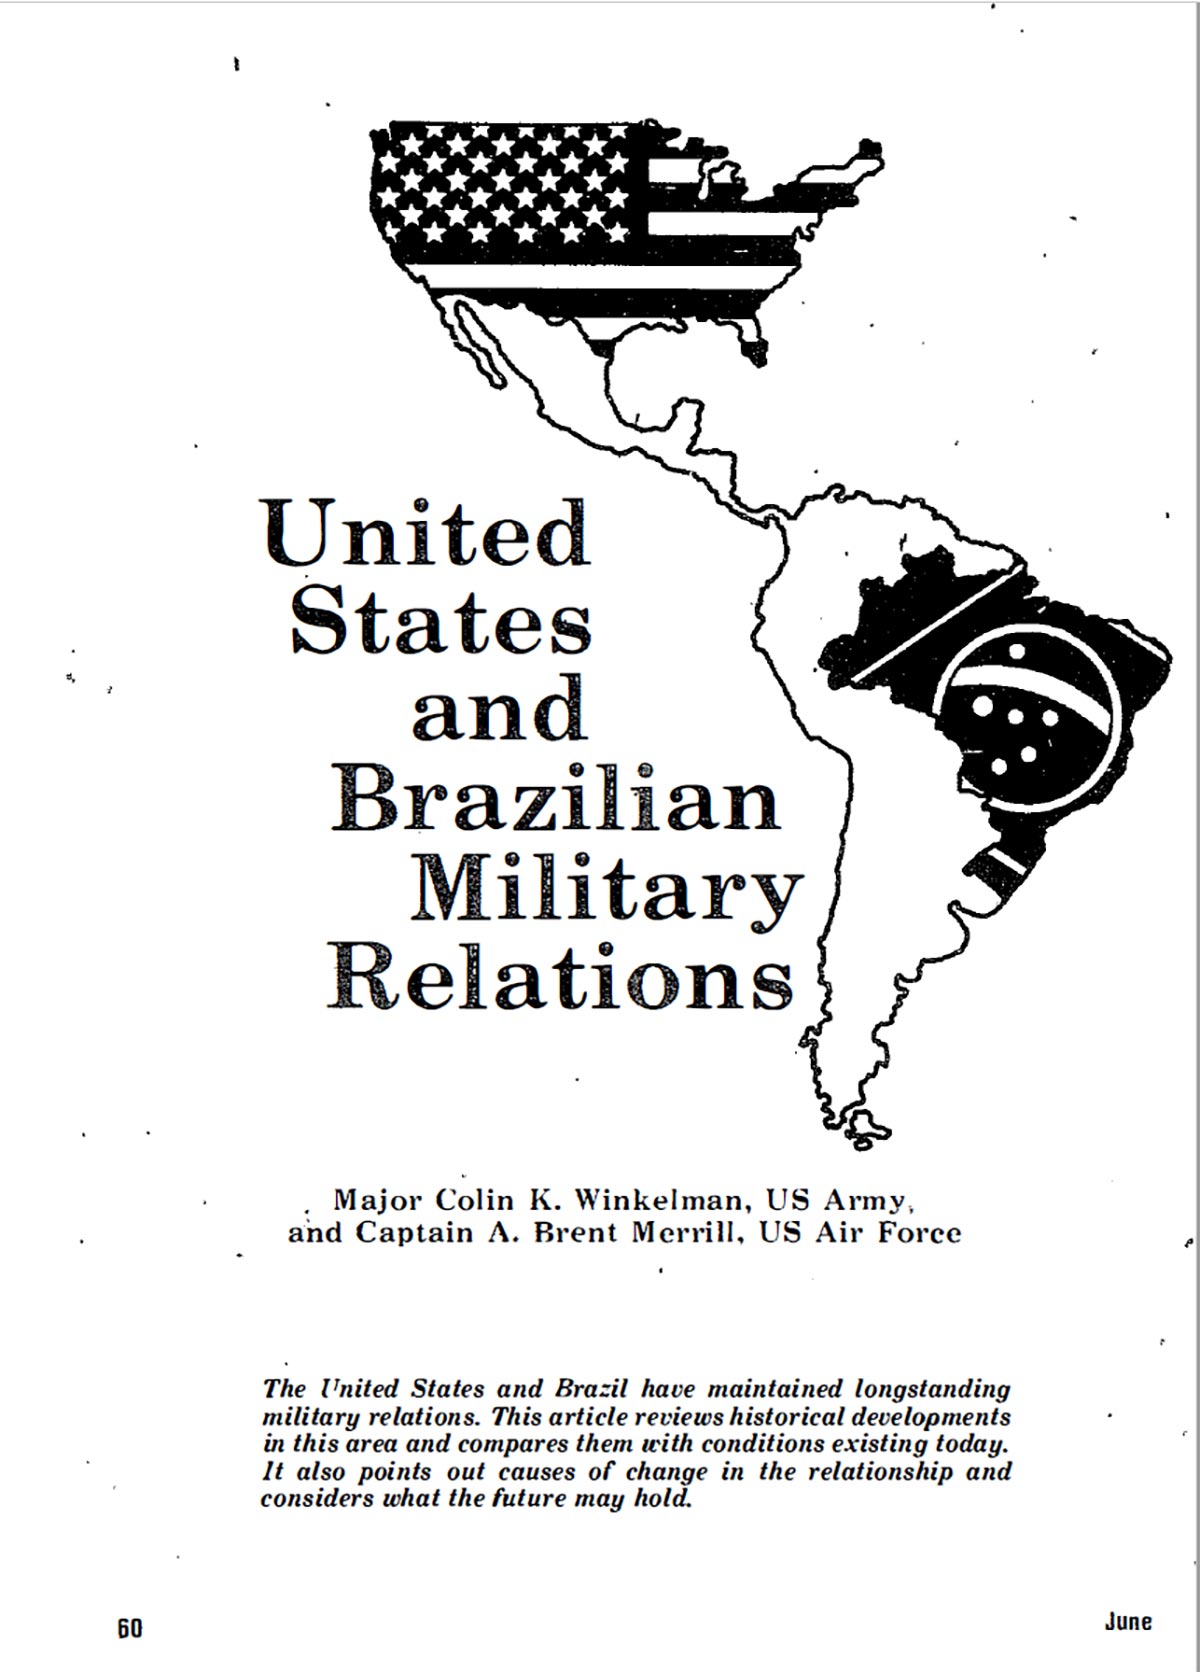 United States and Brazilian Military Relations